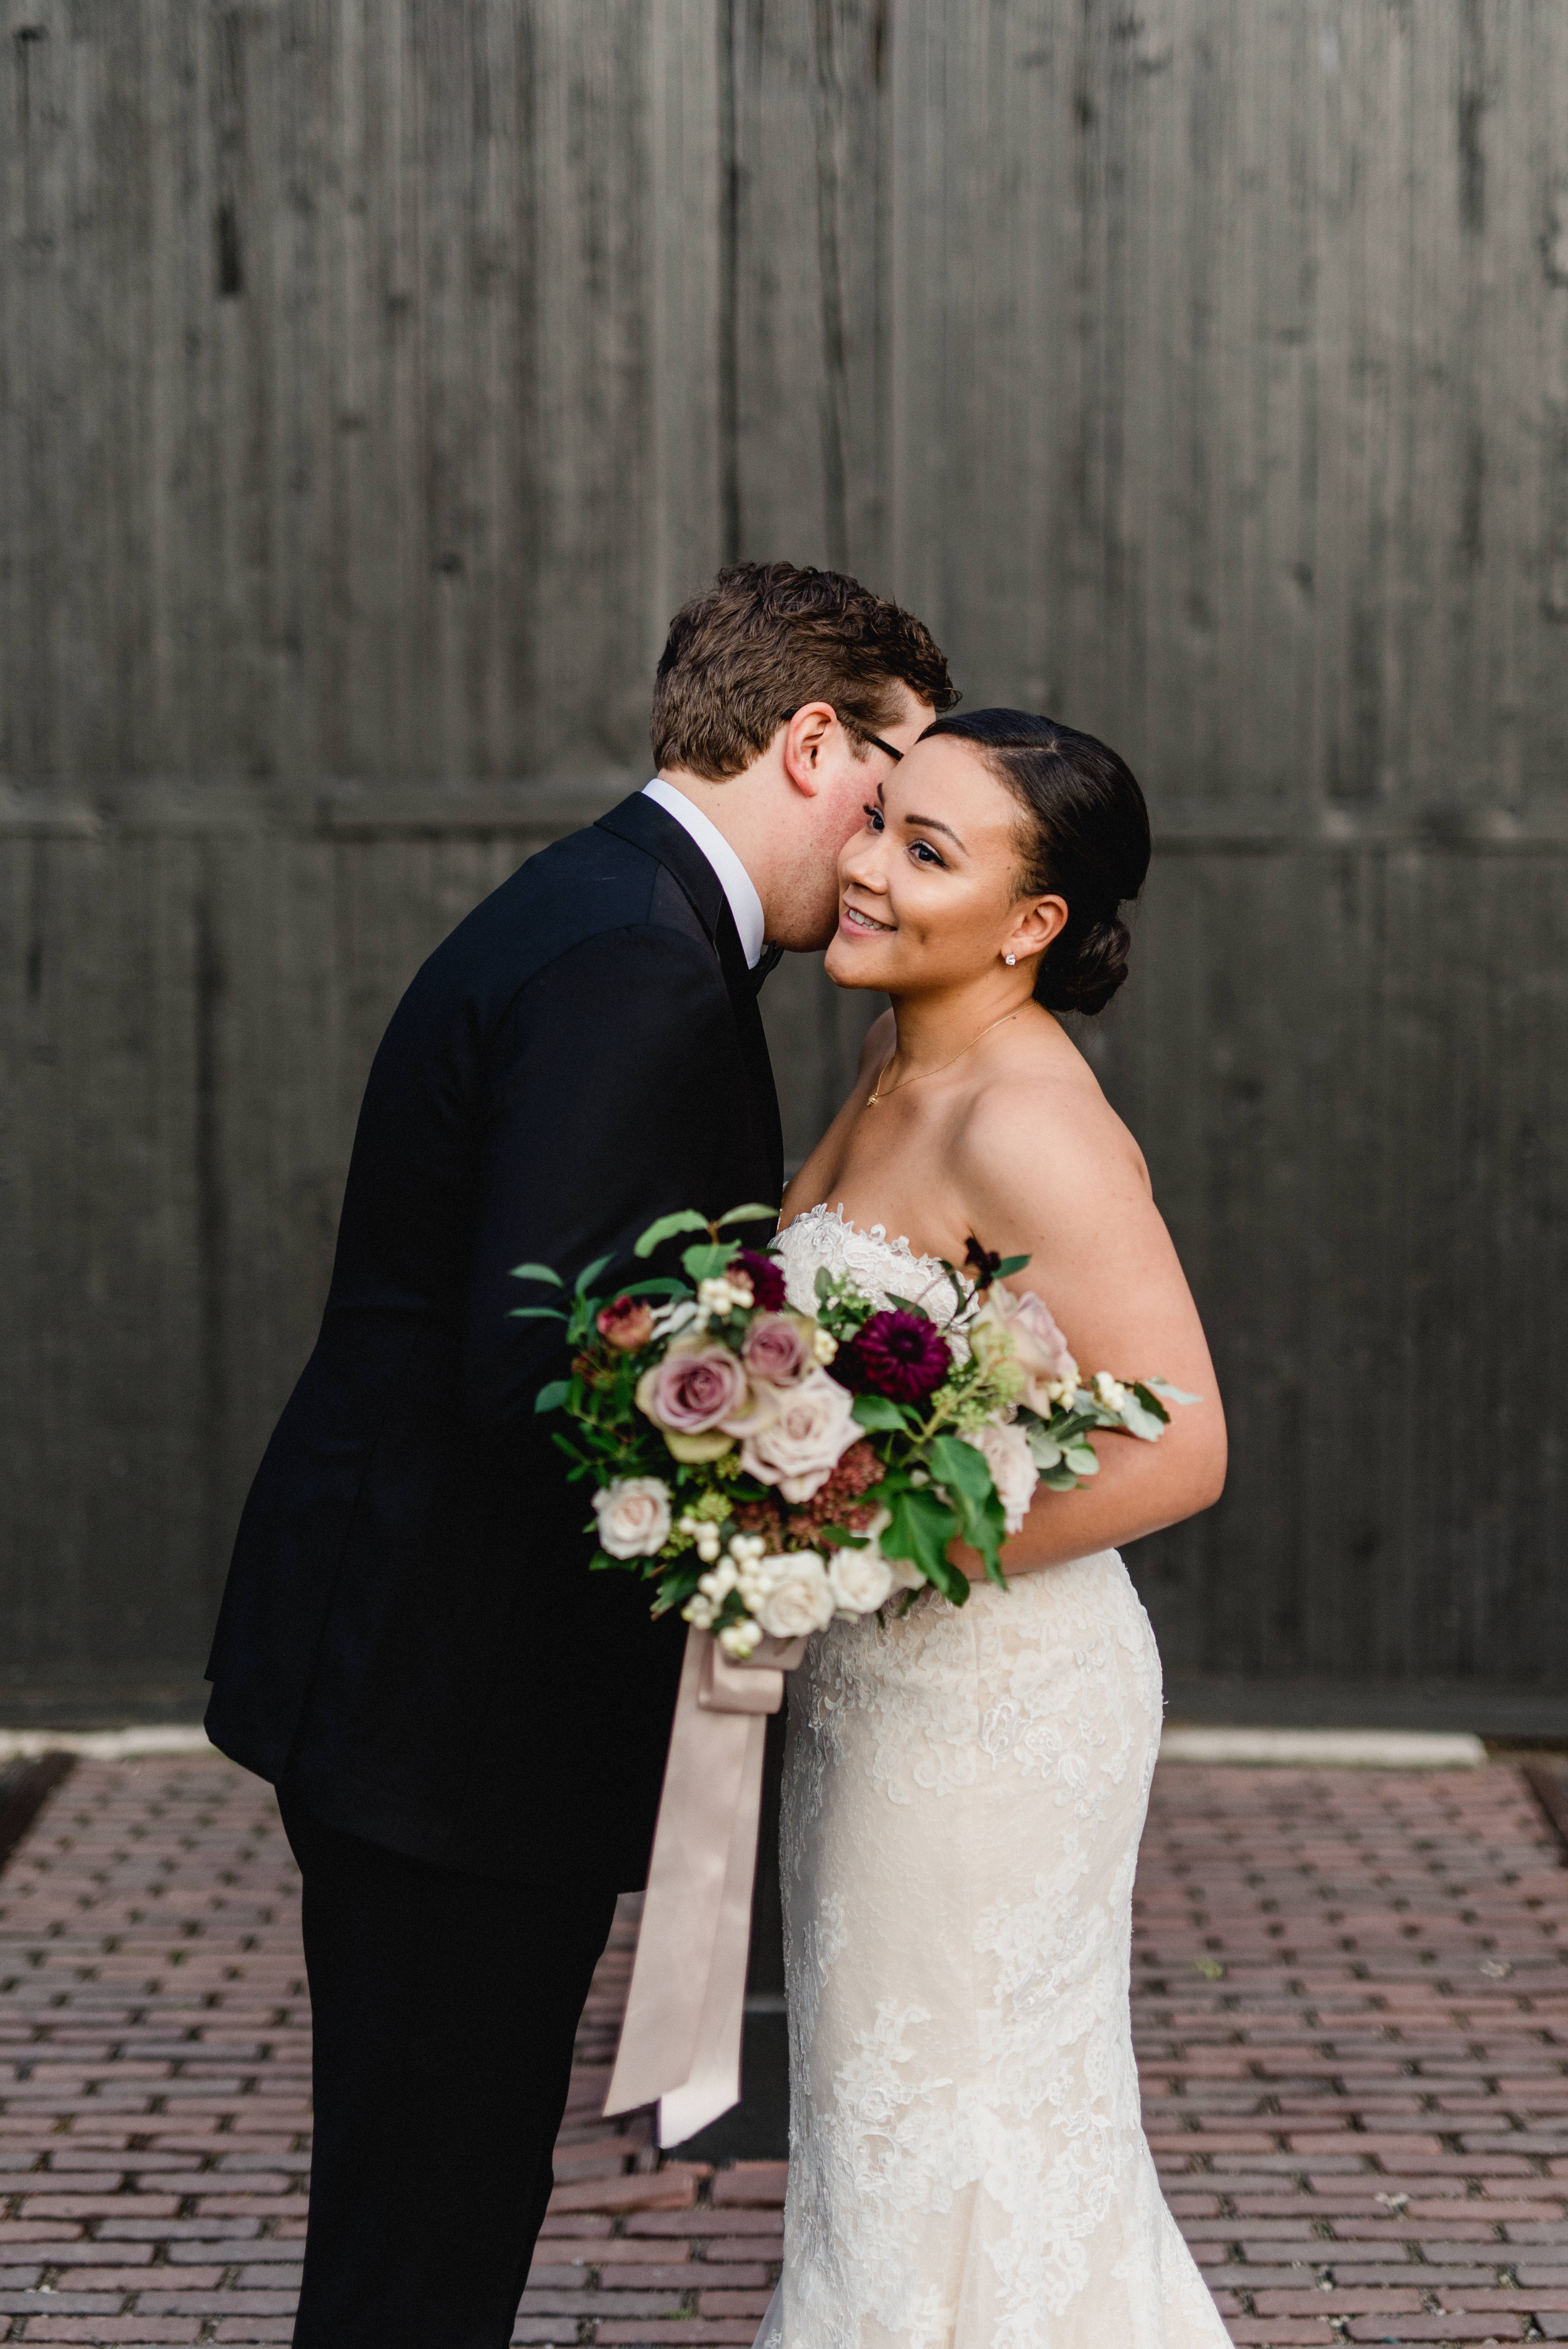 featured on martha stewart weddings steamwhistle brewery downtown toronto wedding | jacqueline james photography modern elegant romantic traditional fall cn tower